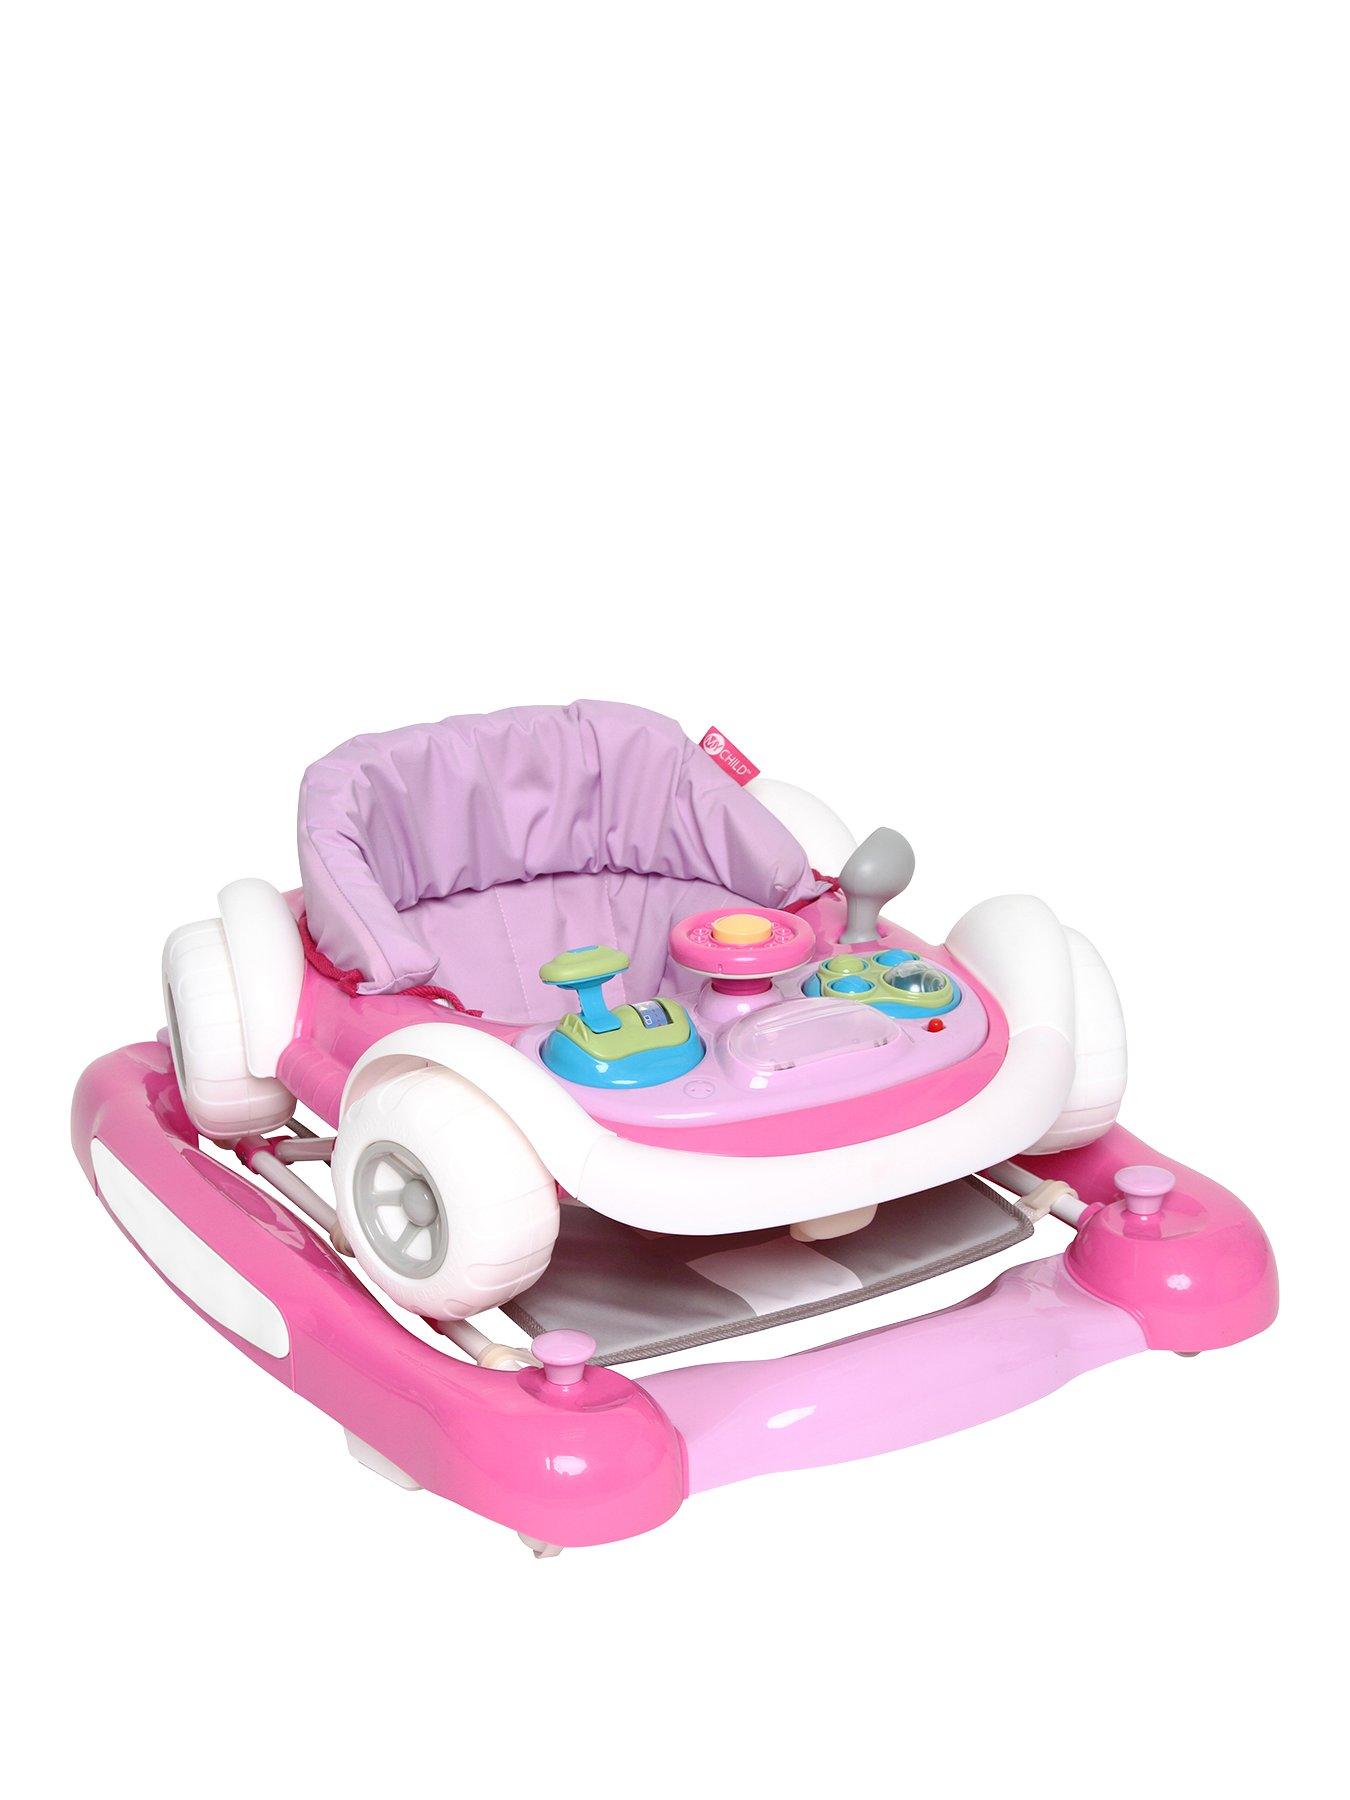 should i get a walker for my baby